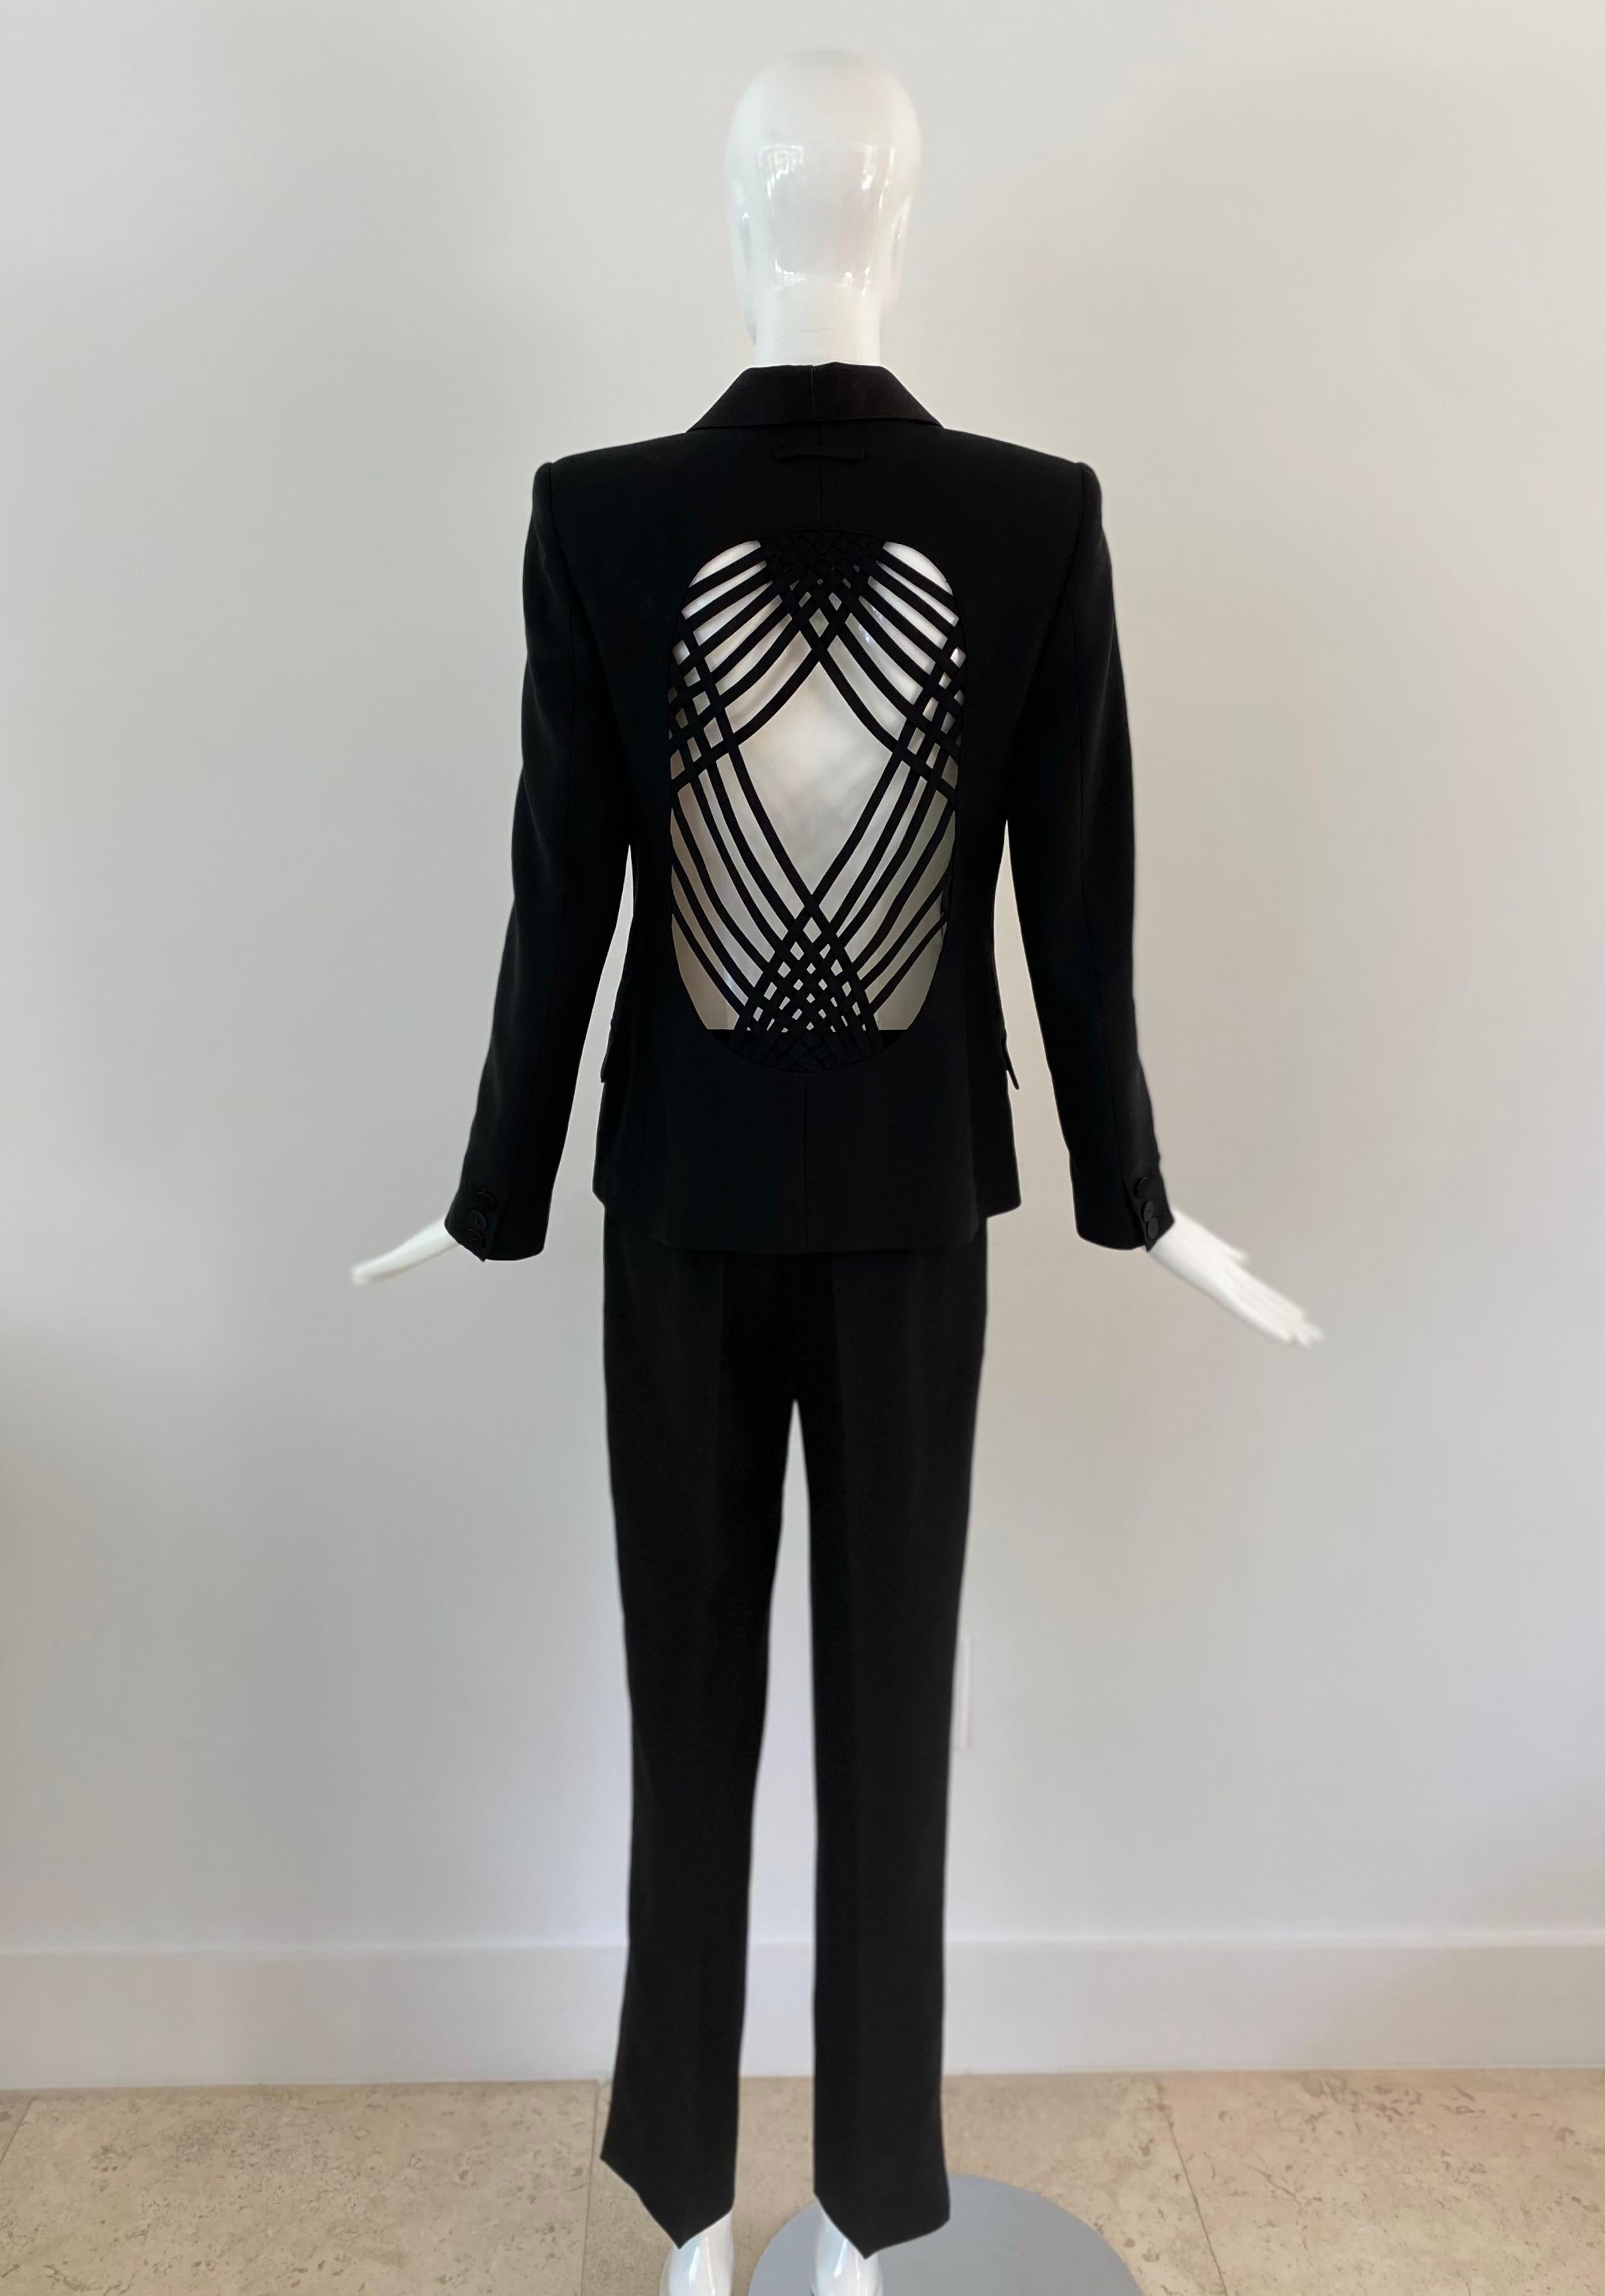 1990s Epic Jean Paul Gaultier Femme tuxedo black suit. The jacket is marked as a European size 42 and the pant as a European size 40. They are both made from virgin wool and rayon. The pant has a black satin tuxedo line on both sides. The jacket has